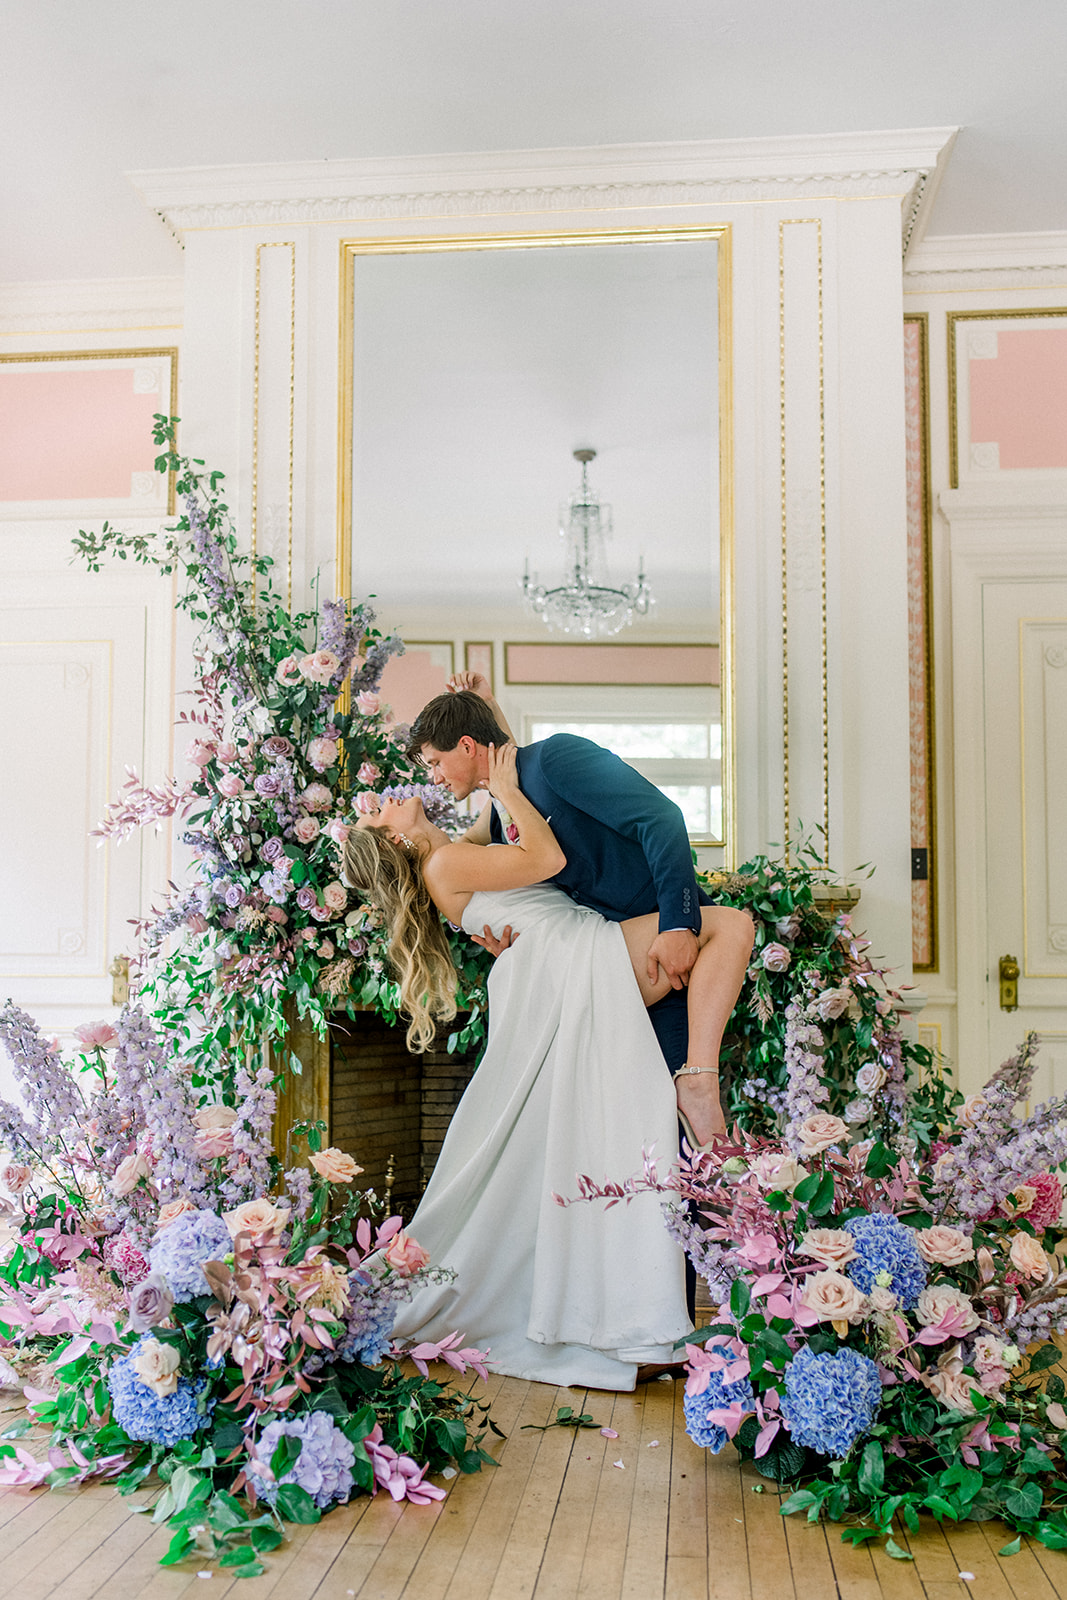 Bride and groom sharing a romantic kiss, showcasing a luxury destination wedding at Cairnwood Estate